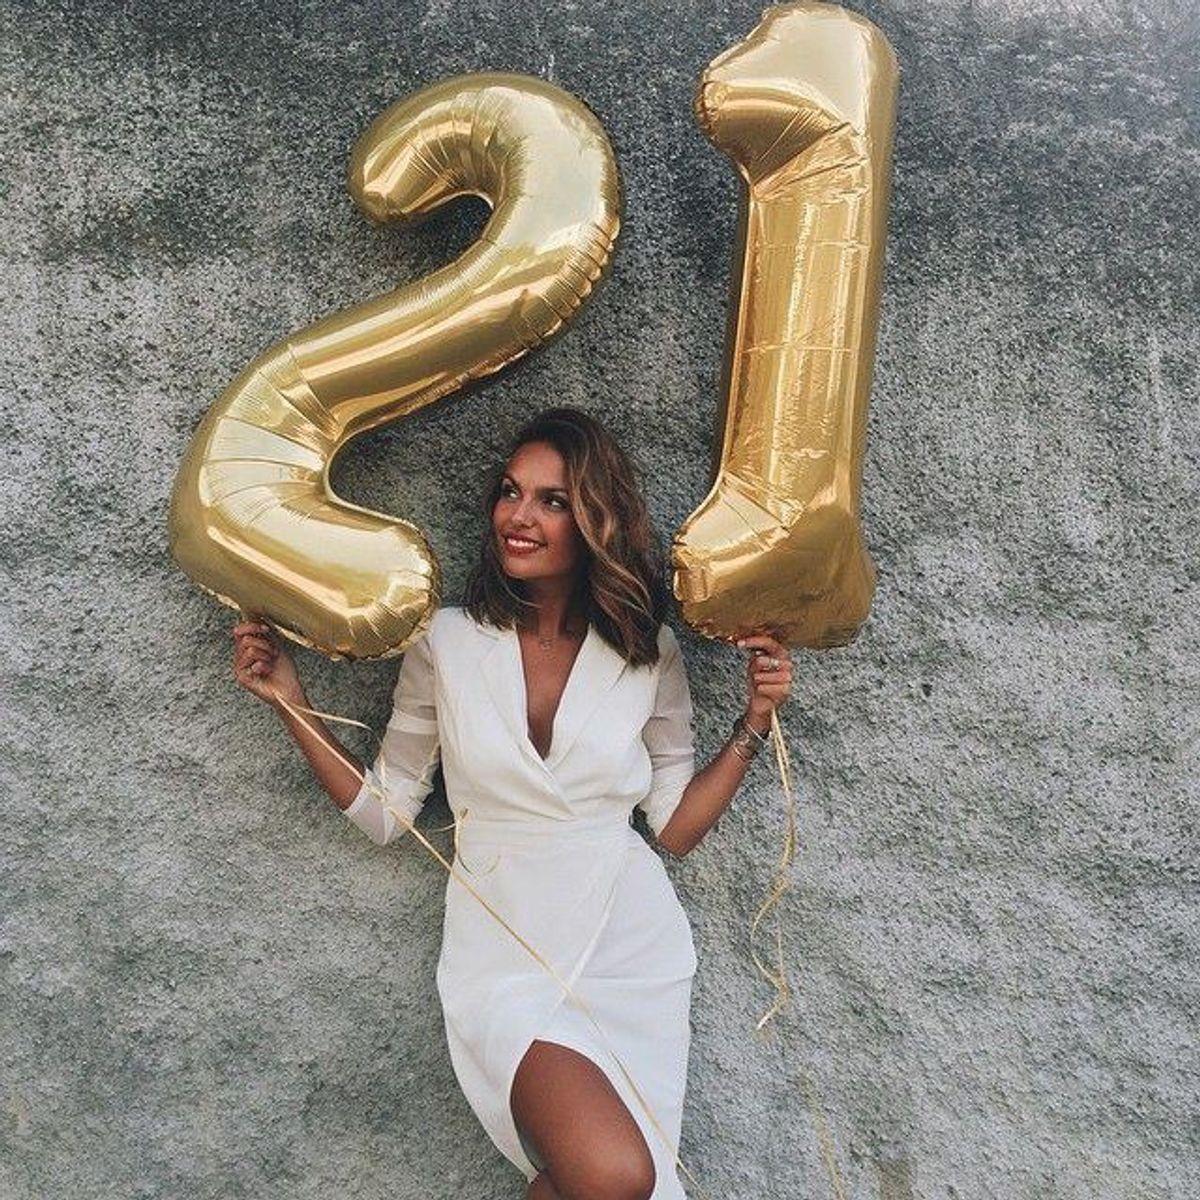 5 Life Lessons I Learned For Better Or Worse At 21